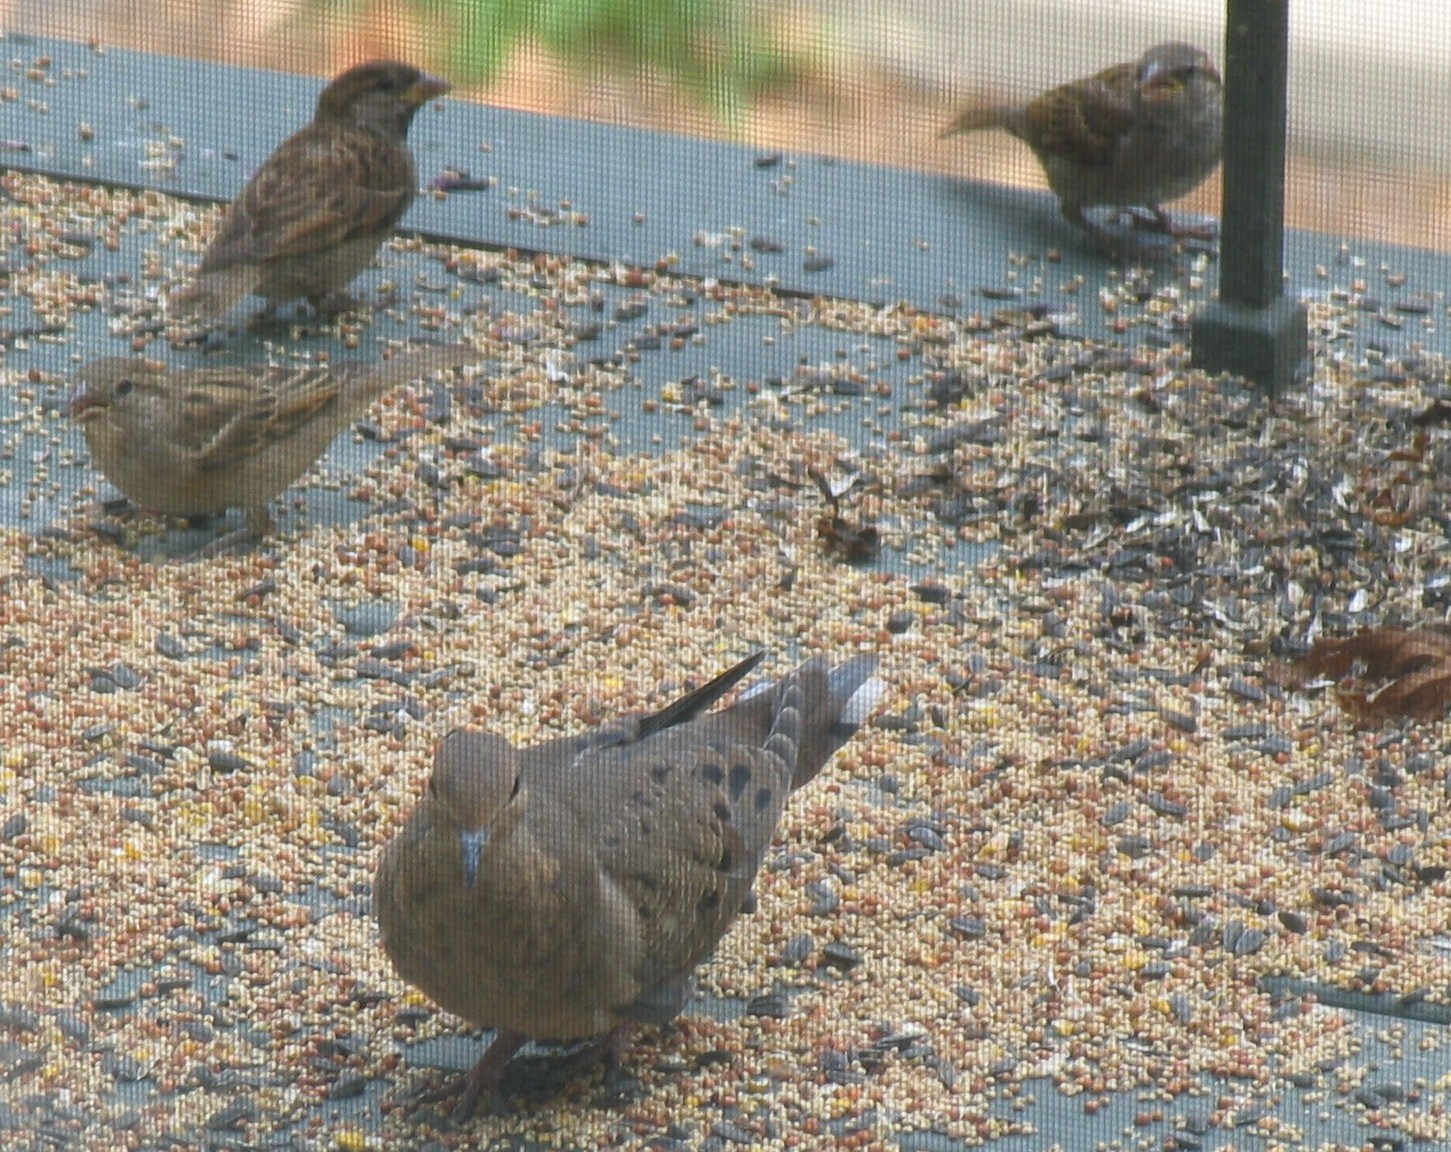 several brown and blue birds eating seed on a feeder